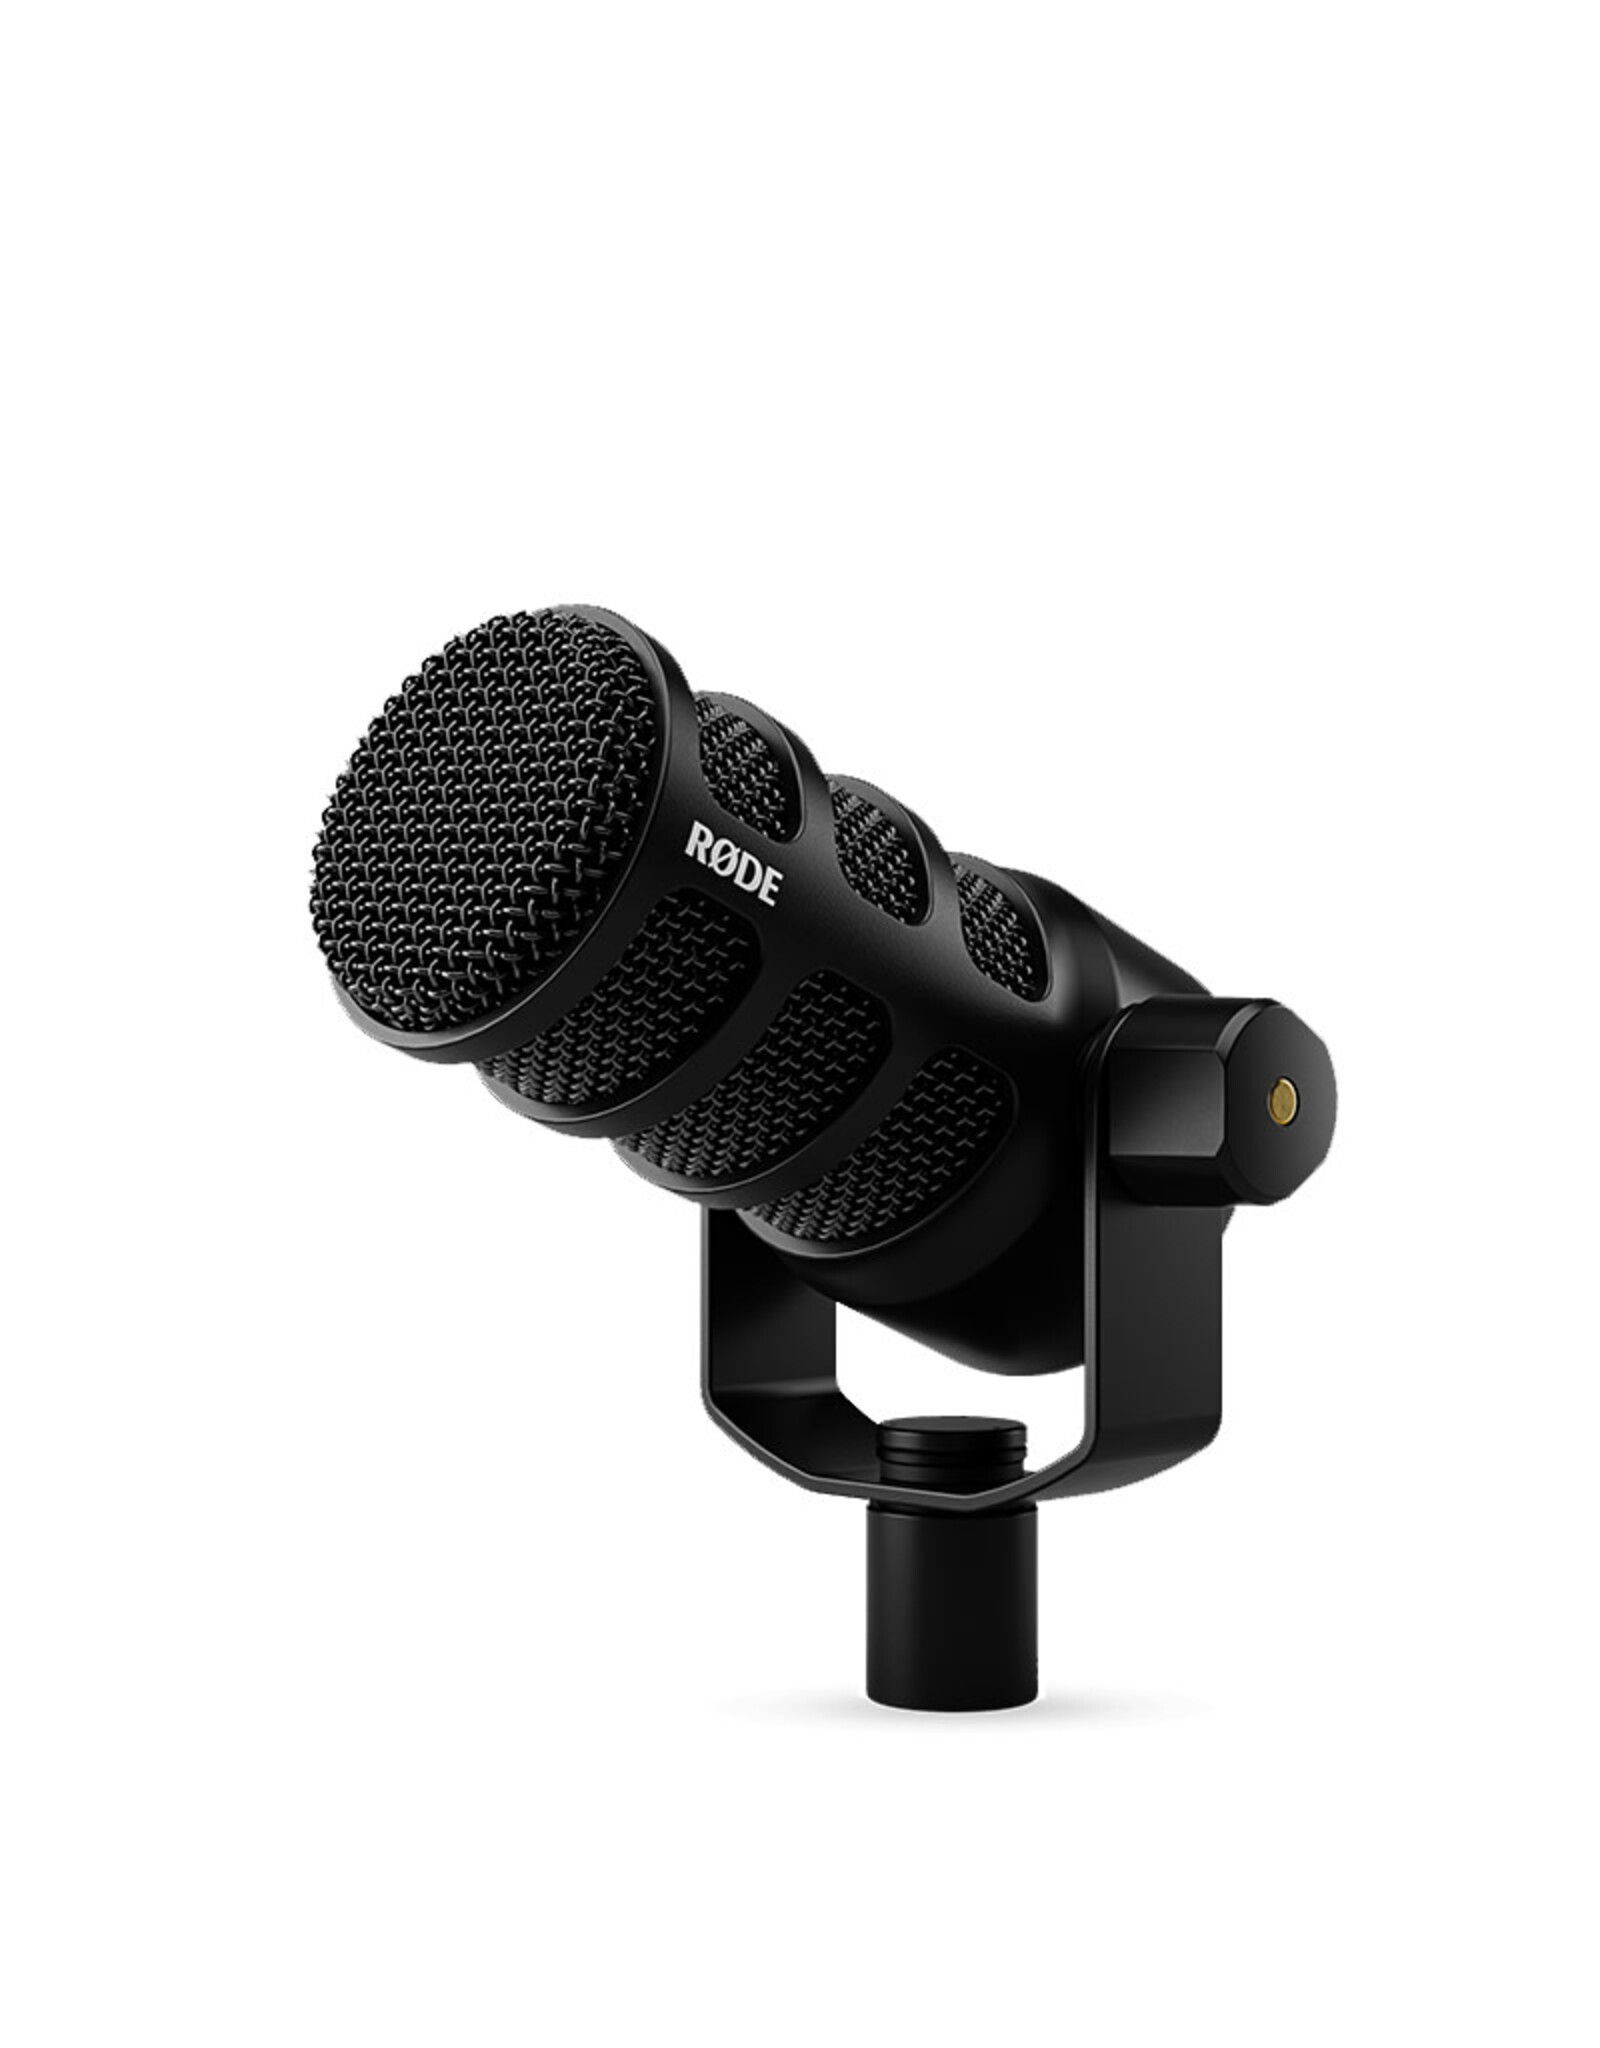 Rode RODE PodMic USB and XLR Dynamic Broadcast Microphone